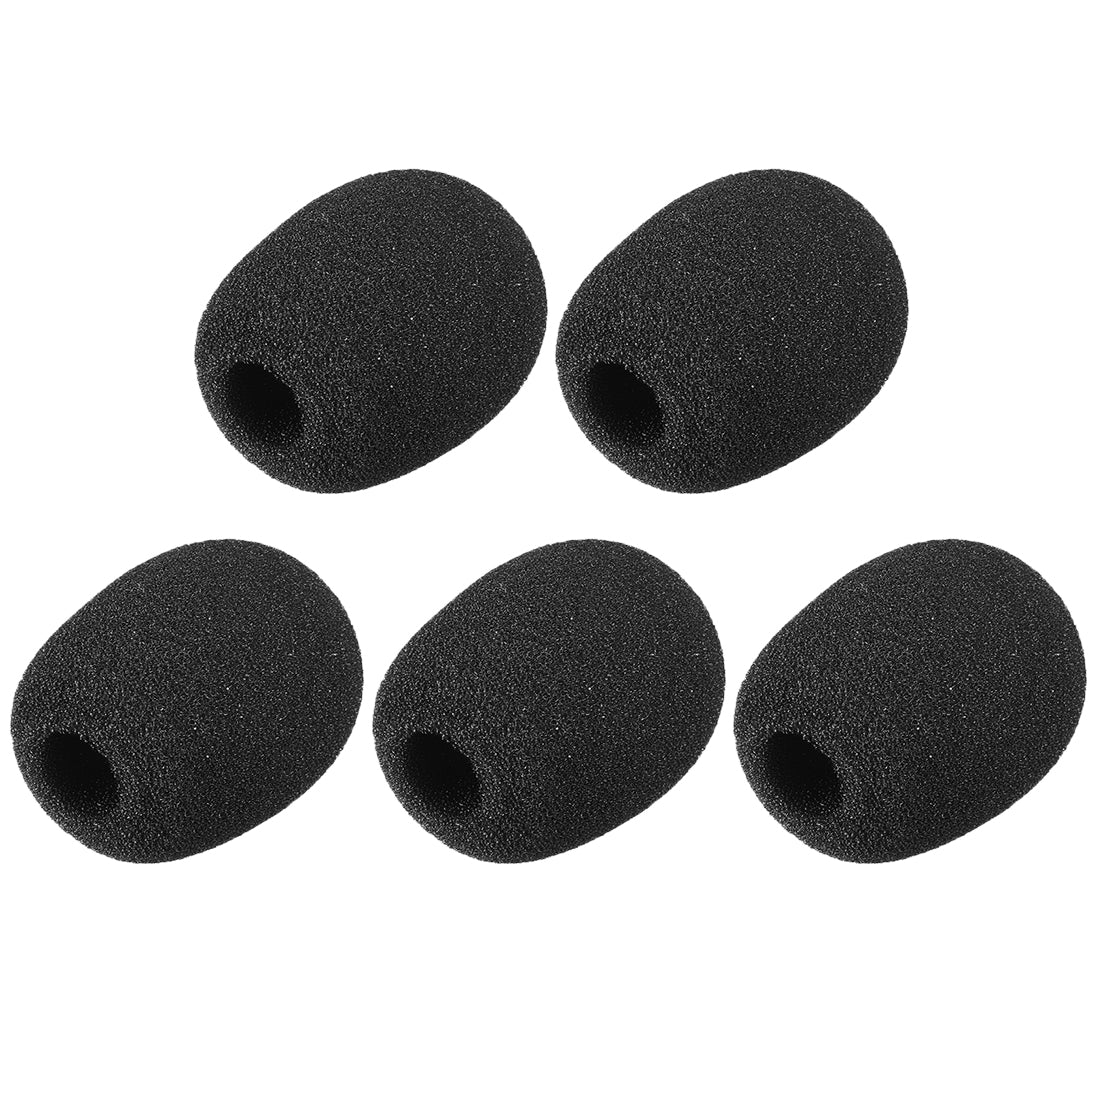 uxcell Uxcell 5PCS Foam Mic Cover Microphone Windscreen Shield Protection Black 40mm Length for Headset Lapel Lavalier